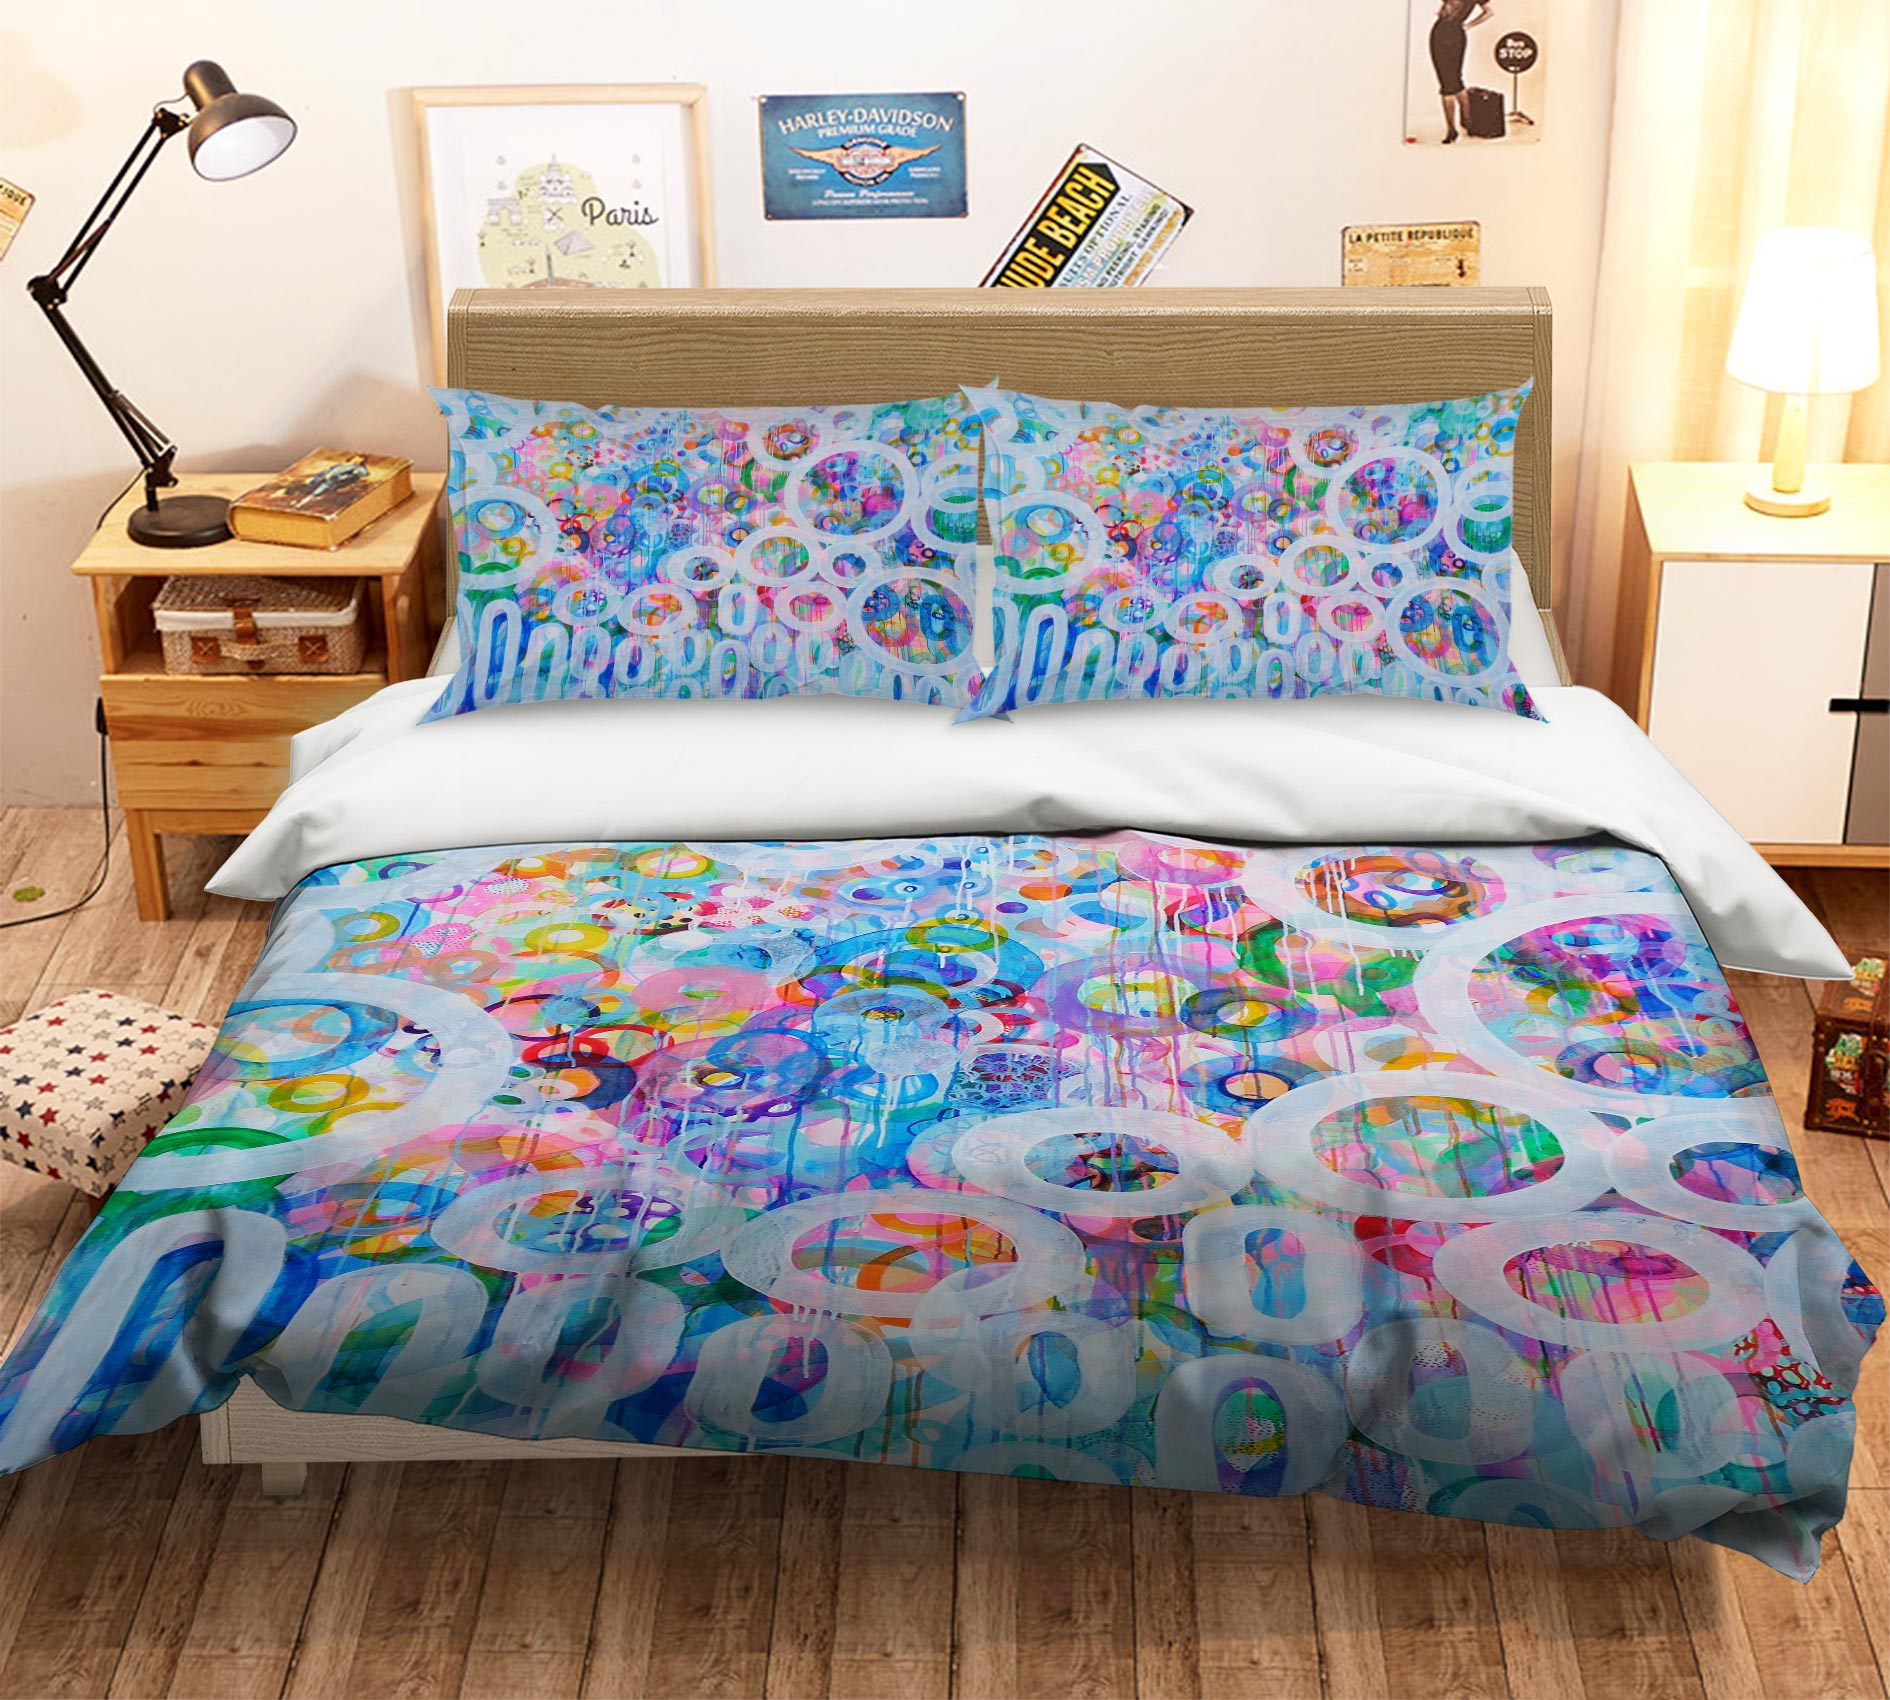 3D Colorful Circle 1132 Misako Chida Bedding Bed Pillowcases Quilt Cover Duvet Cover